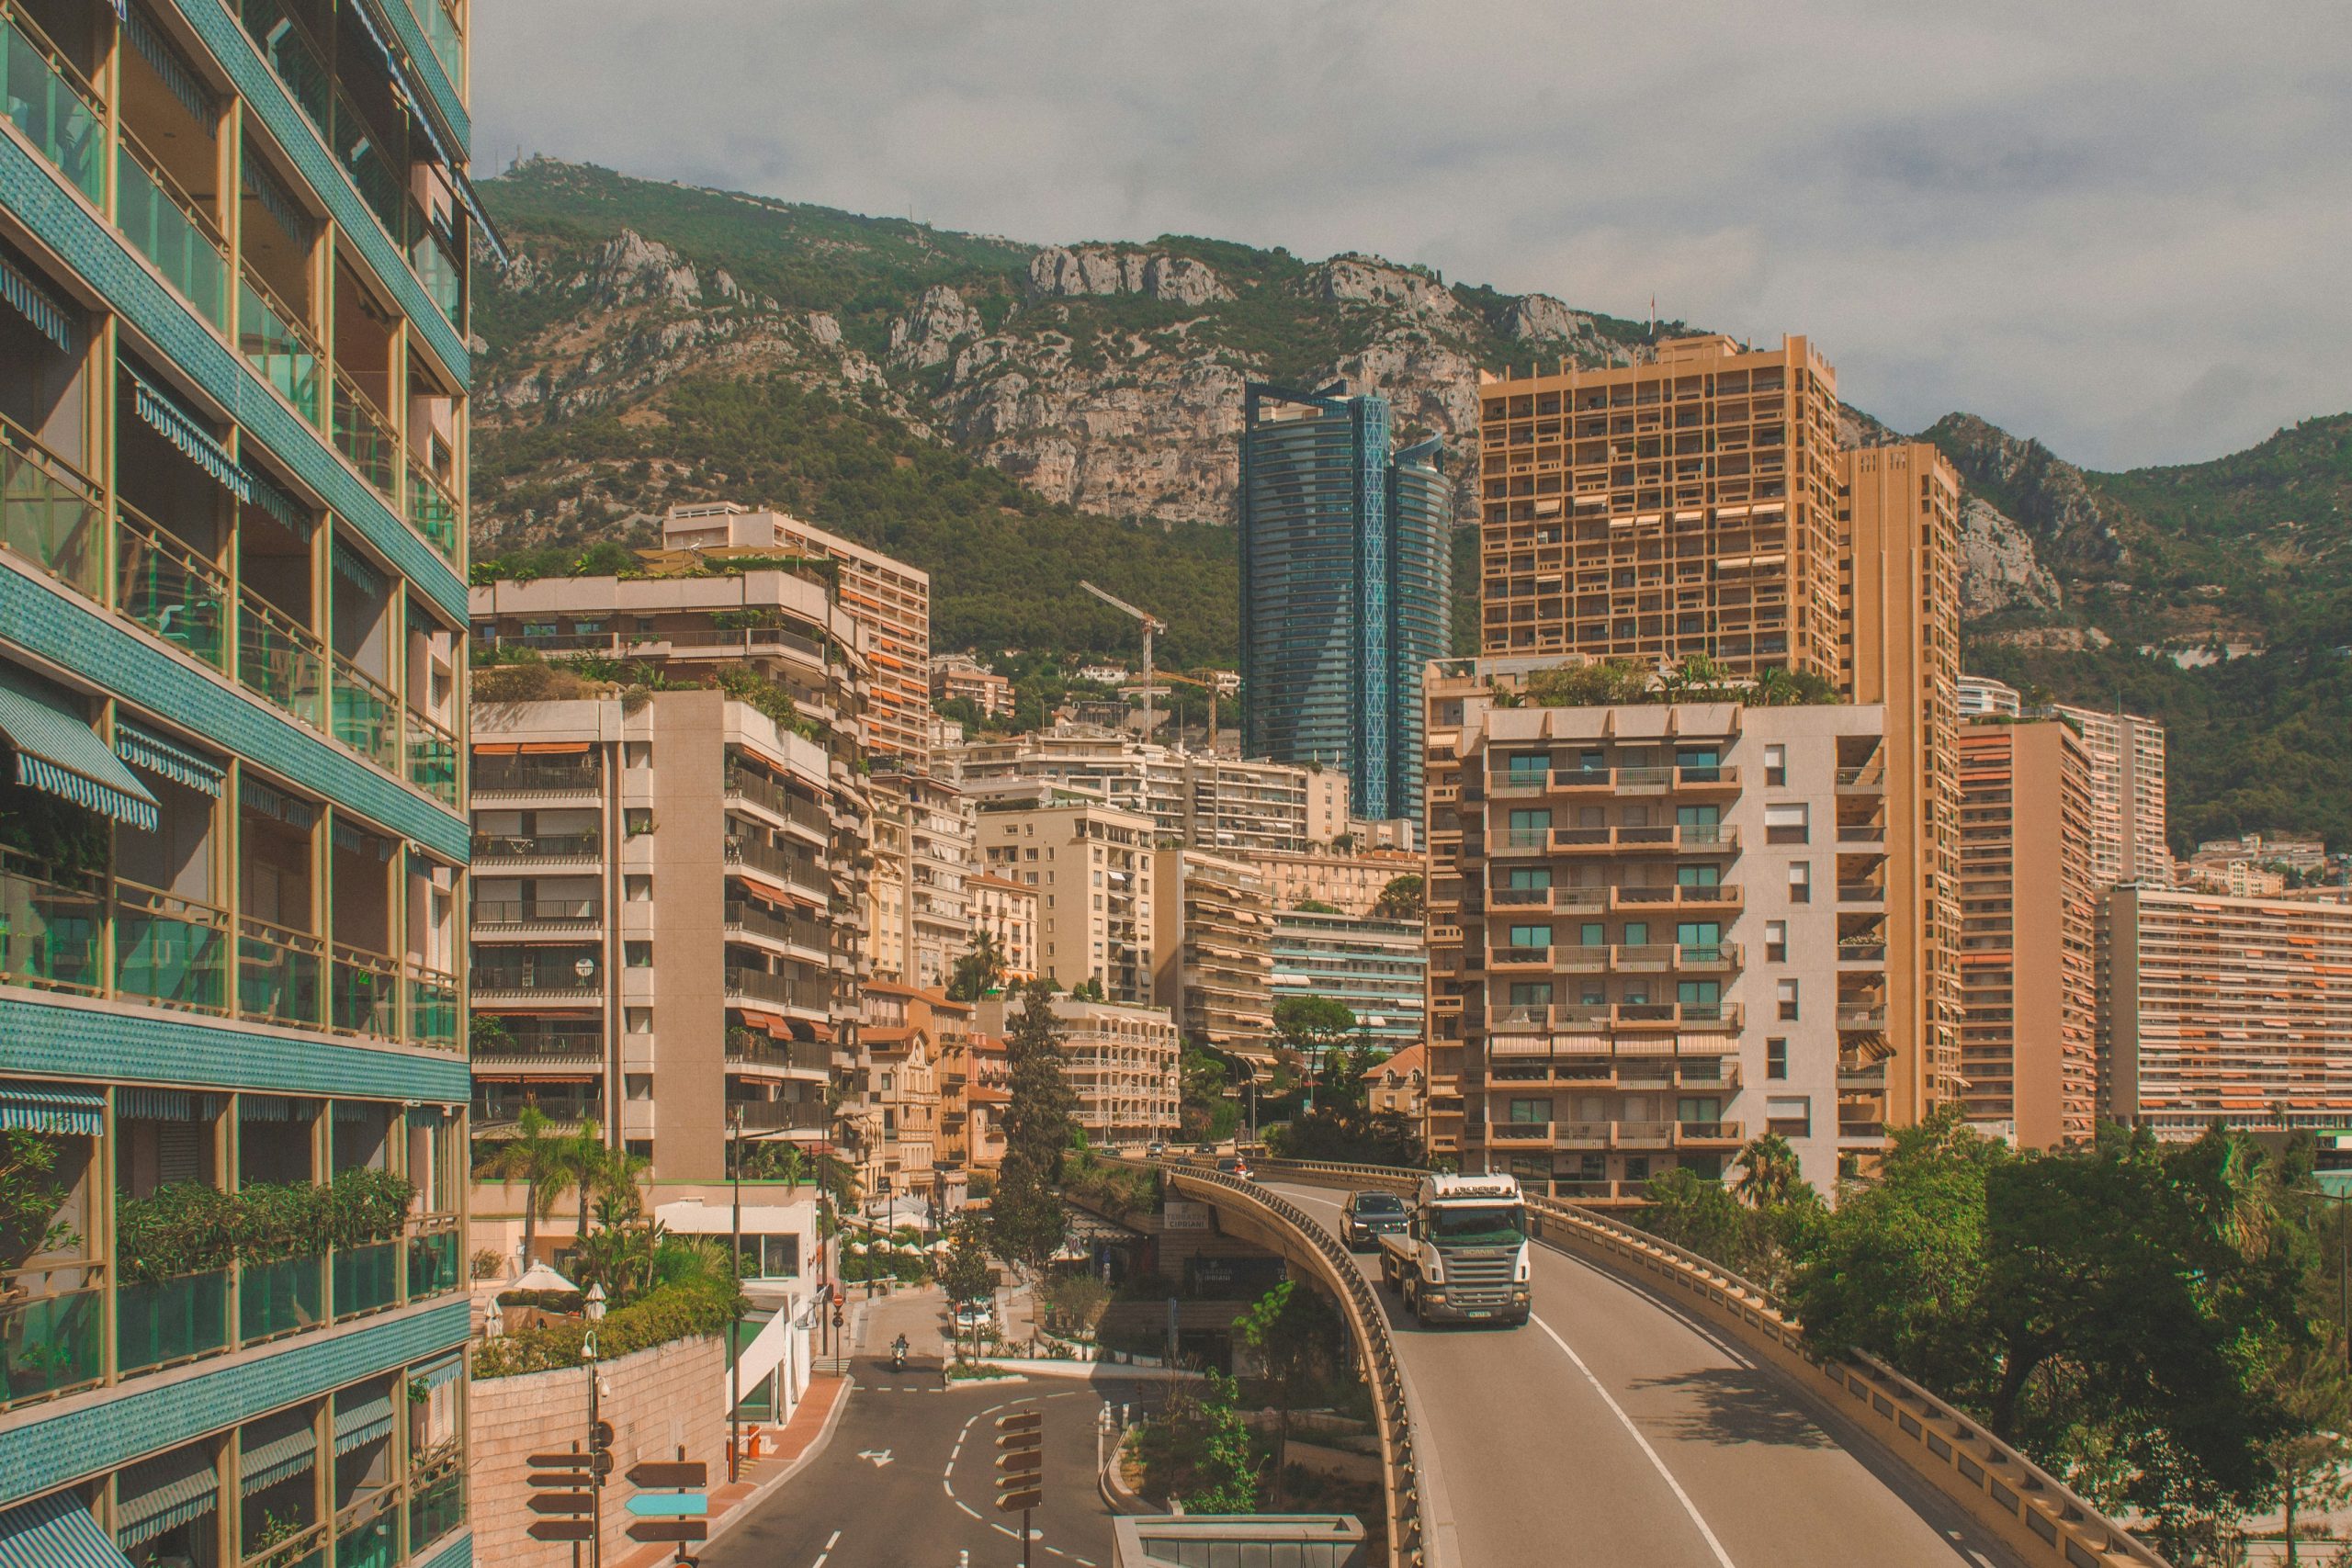 discover the glitz and glamour of monaco with our tourism guide. experience luxury, beautiful landscapes, and unforgettable experiences in the heart of the french riviera.